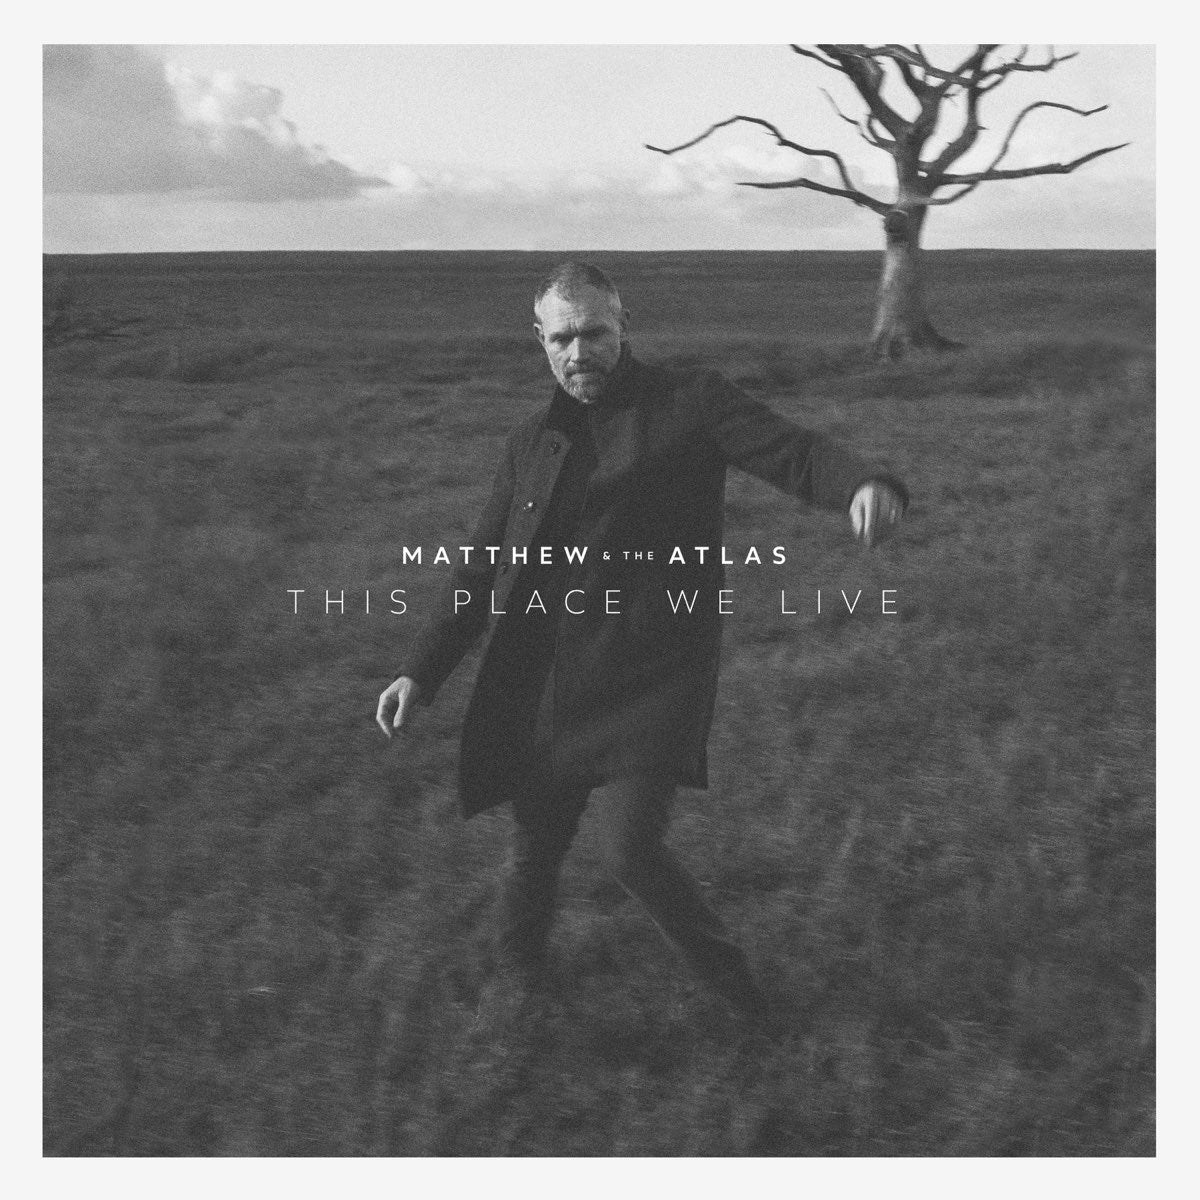 MATTHEW AND THE ATLAS - This Place We Live - LP - Vinyl [OCT 13]